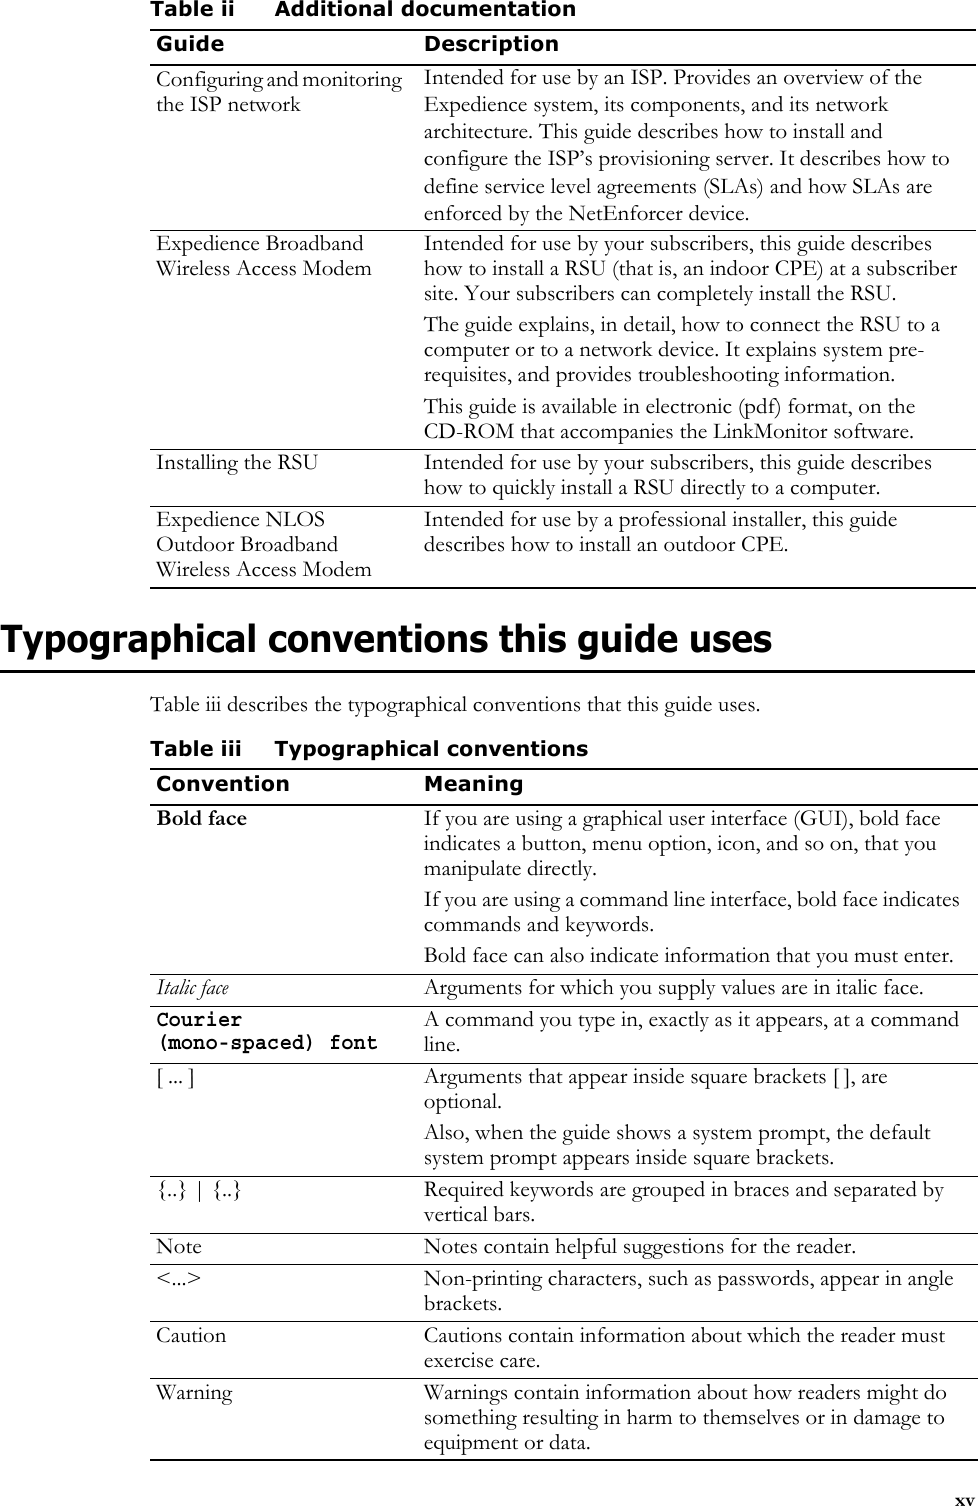 xvTypographical conventions this guide usesTable iii describes the typographical conventions that this guide uses.Configuring and monitoring the ISP networkIntended for use by an ISP. Provides an overview of the Expedience system, its components, and its network architecture. This guide describes how to install and configure the ISP’s provisioning server. It describes how to define service level agreements (SLAs) and how SLAs are enforced by the NetEnforcer device.Expedience Broadband Wireless Access ModemIntended for use by your subscribers, this guide describes how to install a RSU (that is, an indoor CPE) at a subscriber site. Your subscribers can completely install the RSU.The guide explains, in detail, how to connect the RSU to a computer or to a network device. It explains system pre-requisites, and provides troubleshooting information. This guide is available in electronic (pdf) format, on the CD-ROM that accompanies the LinkMonitor software.Installing the RSU Intended for use by your subscribers, this guide describes how to quickly install a RSU directly to a computer. Expedience NLOS Outdoor Broadband Wireless Access ModemIntended for use by a professional installer, this guide describes how to install an outdoor CPE. Table ii Additional documentationGuide DescriptionTable iii Typographical conventionsConvention MeaningBold face If you are using a graphical user interface (GUI), bold face indicates a button, menu option, icon, and so on, that you manipulate directly.If you are using a command line interface, bold face indicates commands and keywords.Bold face can also indicate information that you must enter.Italic face Arguments for which you supply values are in italic face.Courier (mono-spaced) fontA command you type in, exactly as it appears, at a command line.[ ... ] Arguments that appear inside square brackets [ ], are optional.Also, when the guide shows a system prompt, the default system prompt appears inside square brackets.{..} | {..} Required keywords are grouped in braces and separated by vertical bars.Note Notes contain helpful suggestions for the reader.&lt;...&gt; Non-printing characters, such as passwords, appear in angle brackets.Caution Cautions contain information about which the reader must exercise care.Warning Warnings contain information about how readers might do something resulting in harm to themselves or in damage to equipment or data.